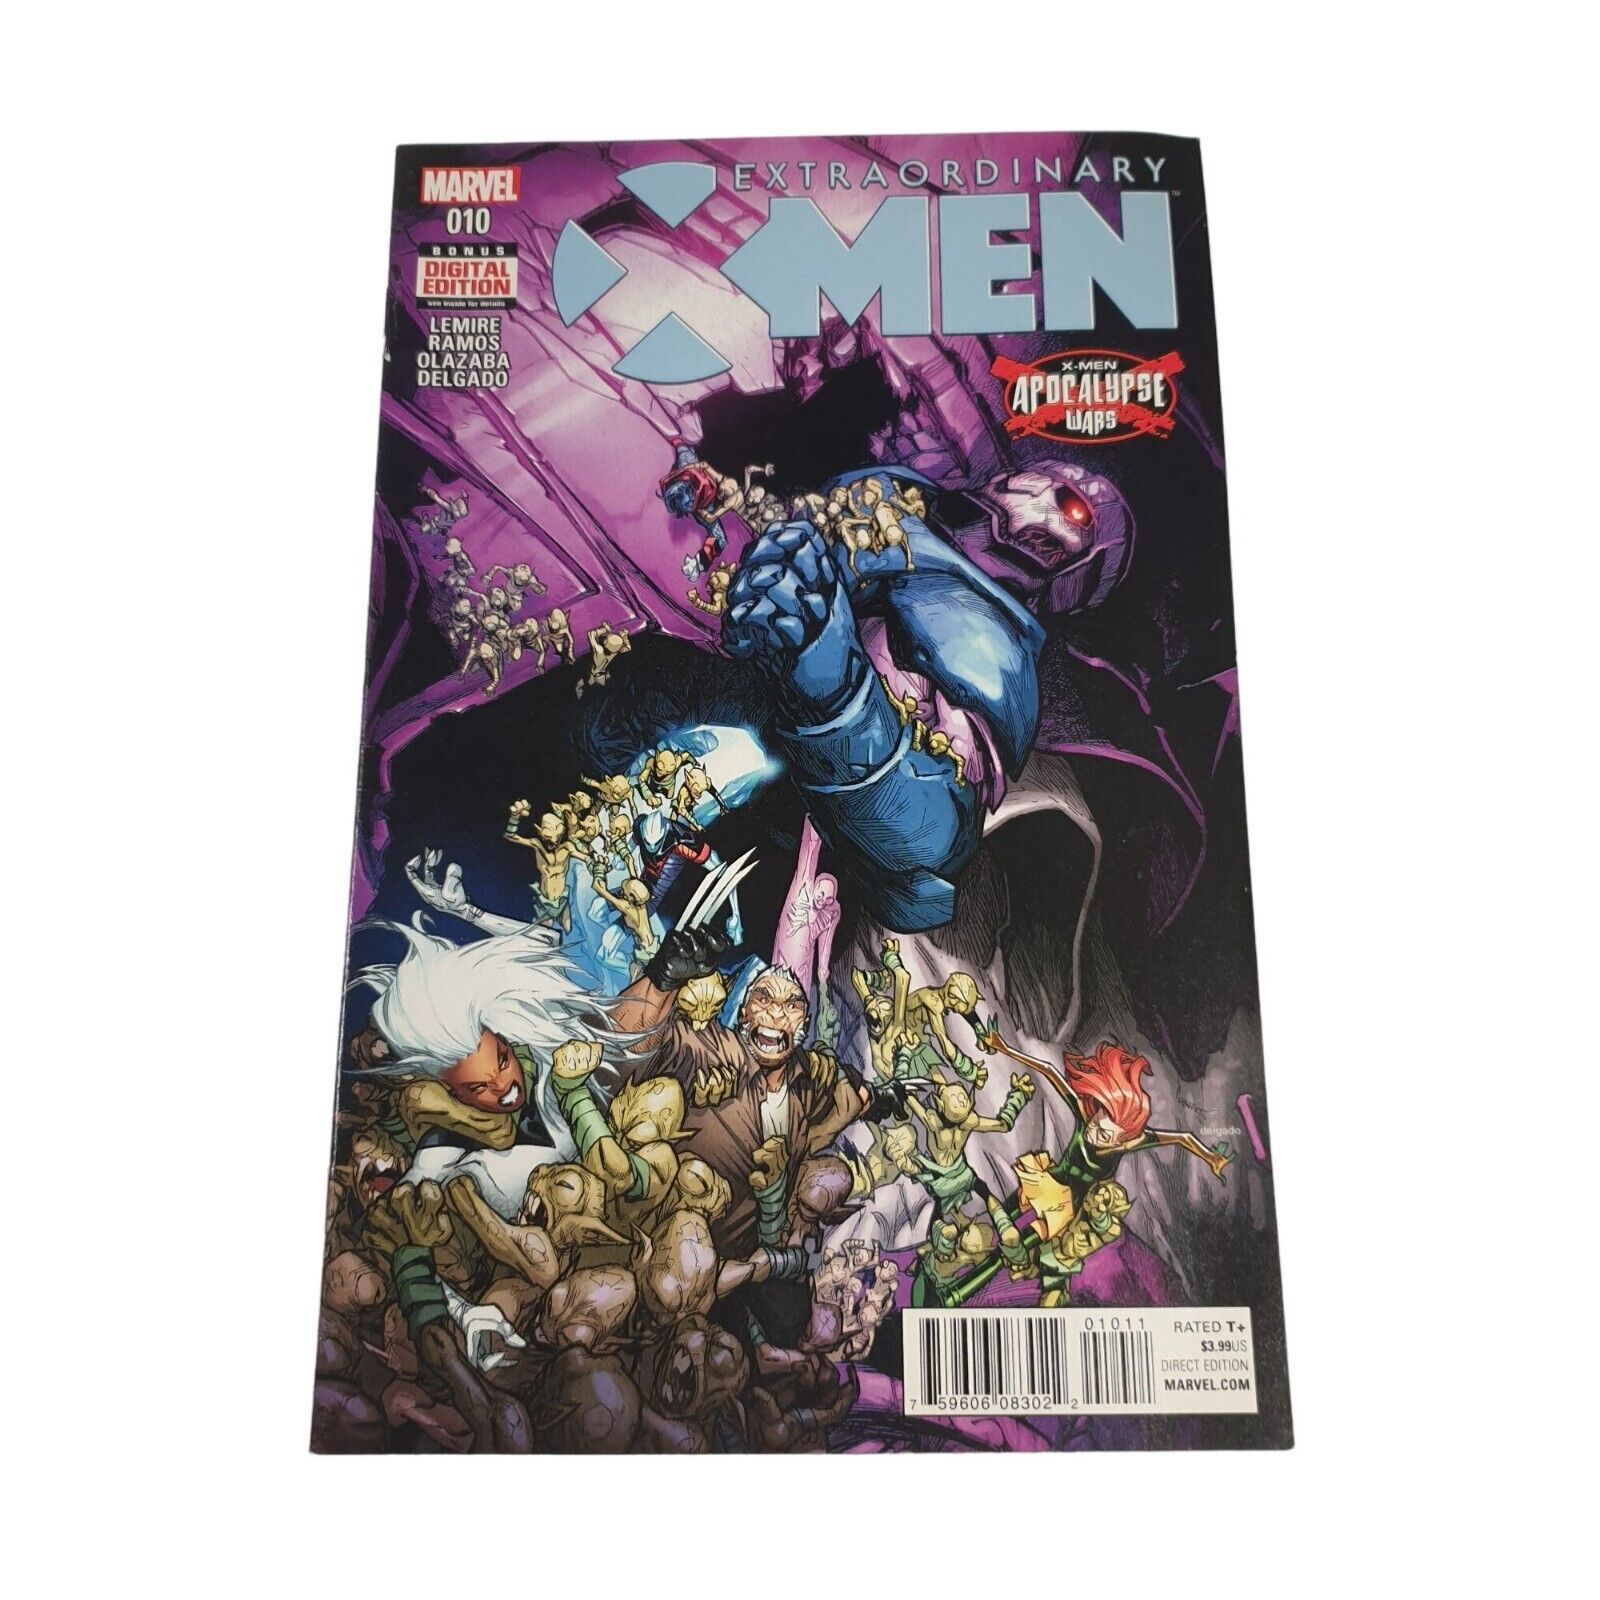 Primary image for Extraordinary X Men 10 July 2016 Marvel Comic Book Collector Bagged Boarded